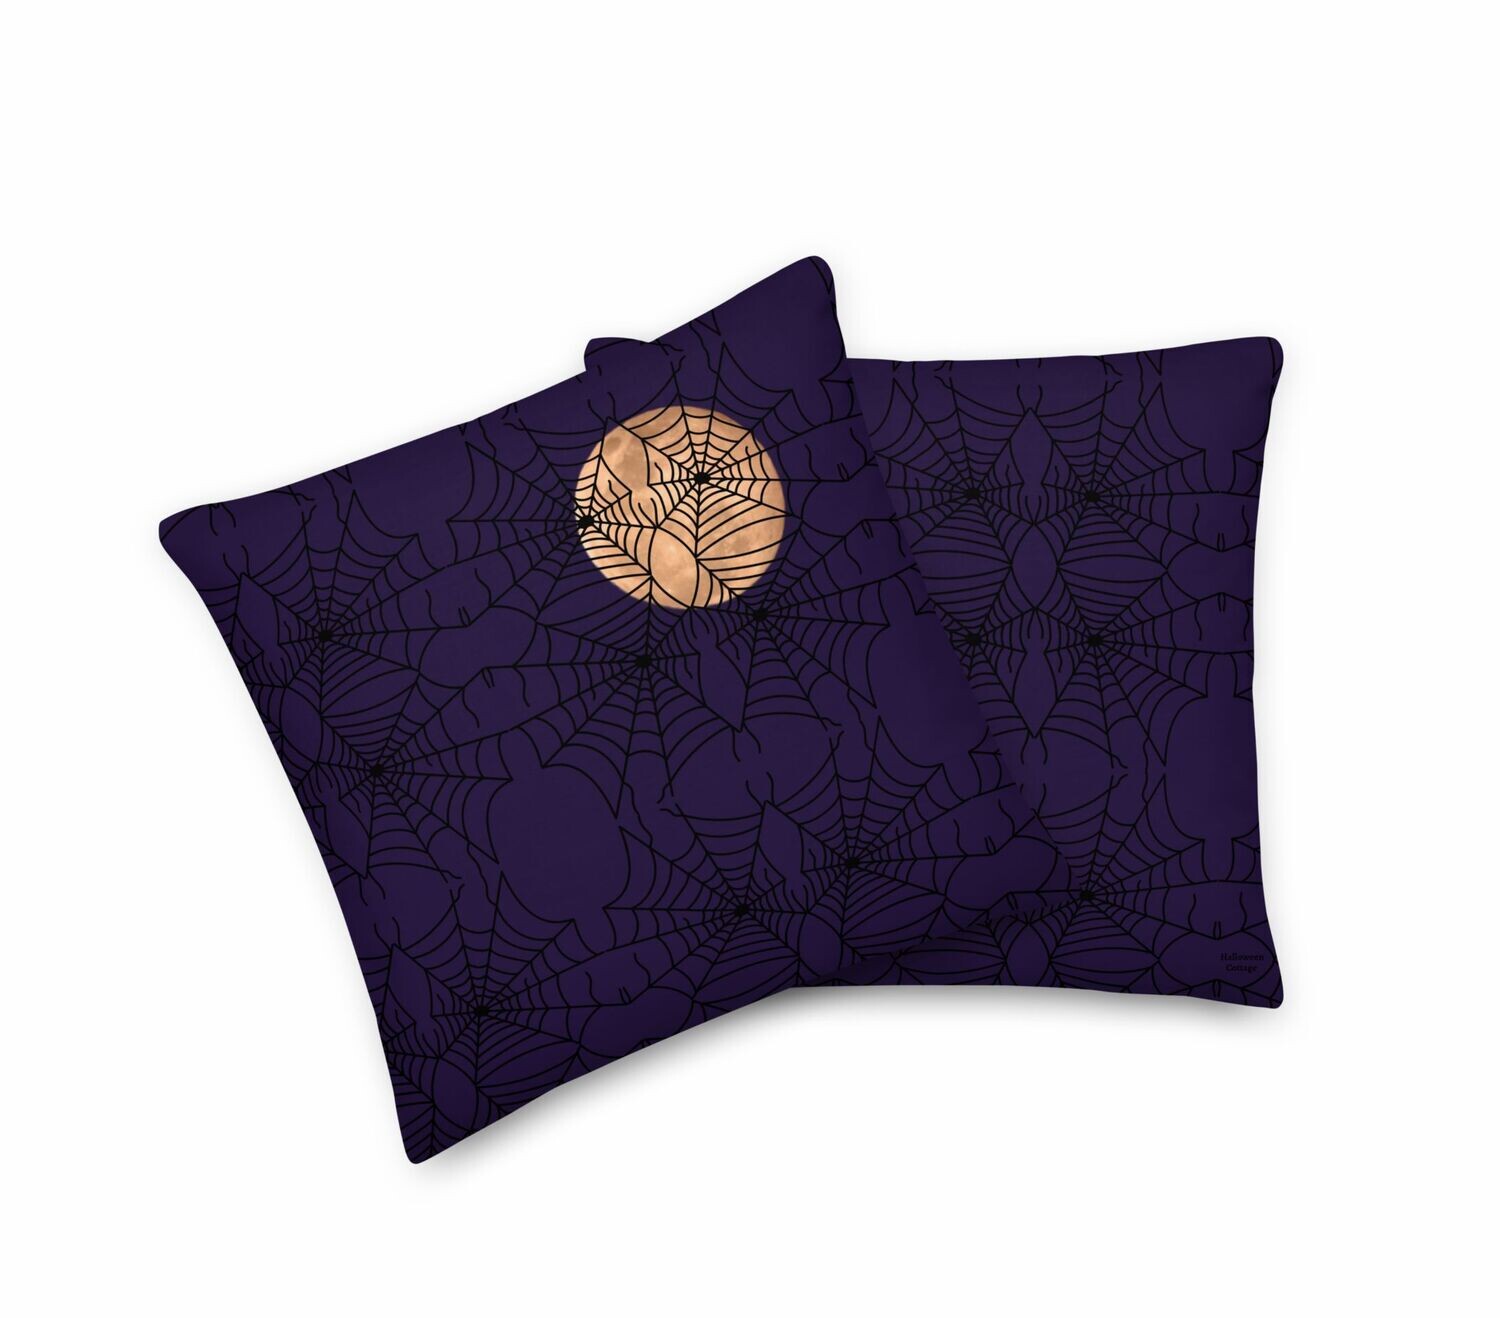 Full Moon and Spider Webs Premium Pillow - 18